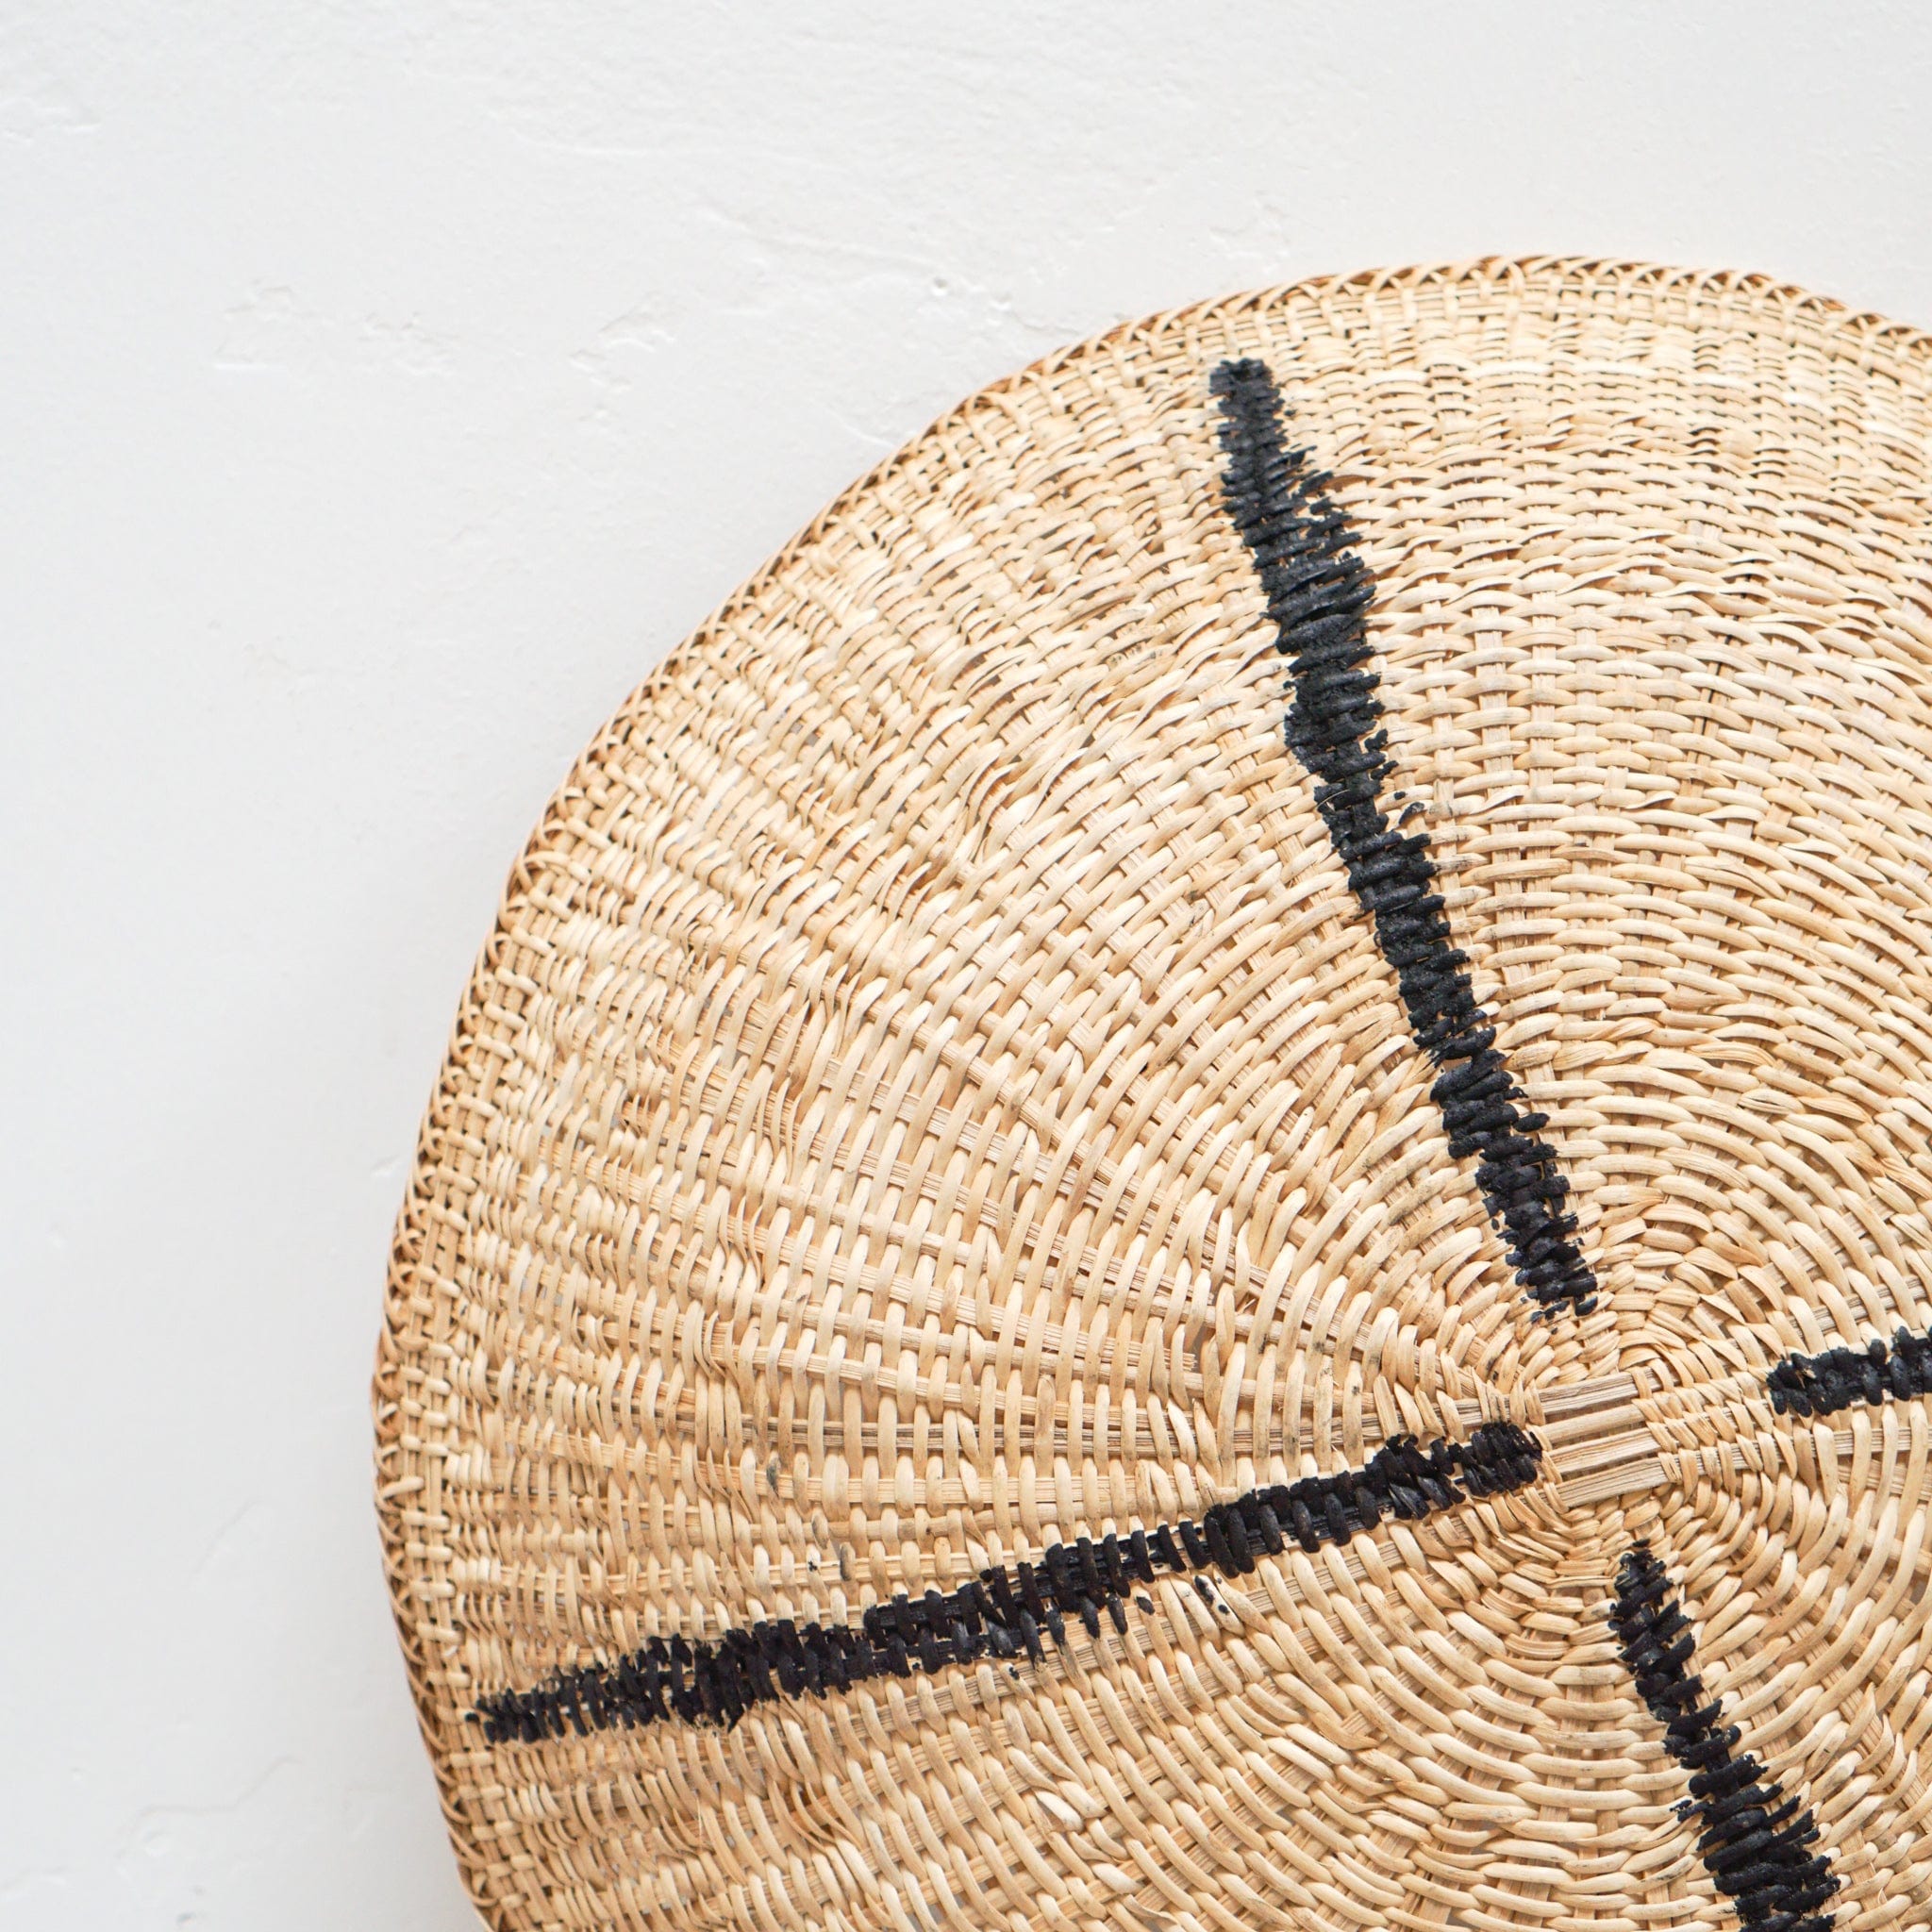 INCAUSA Garden + Utility Woven Baskets with Hand Painted Graphism